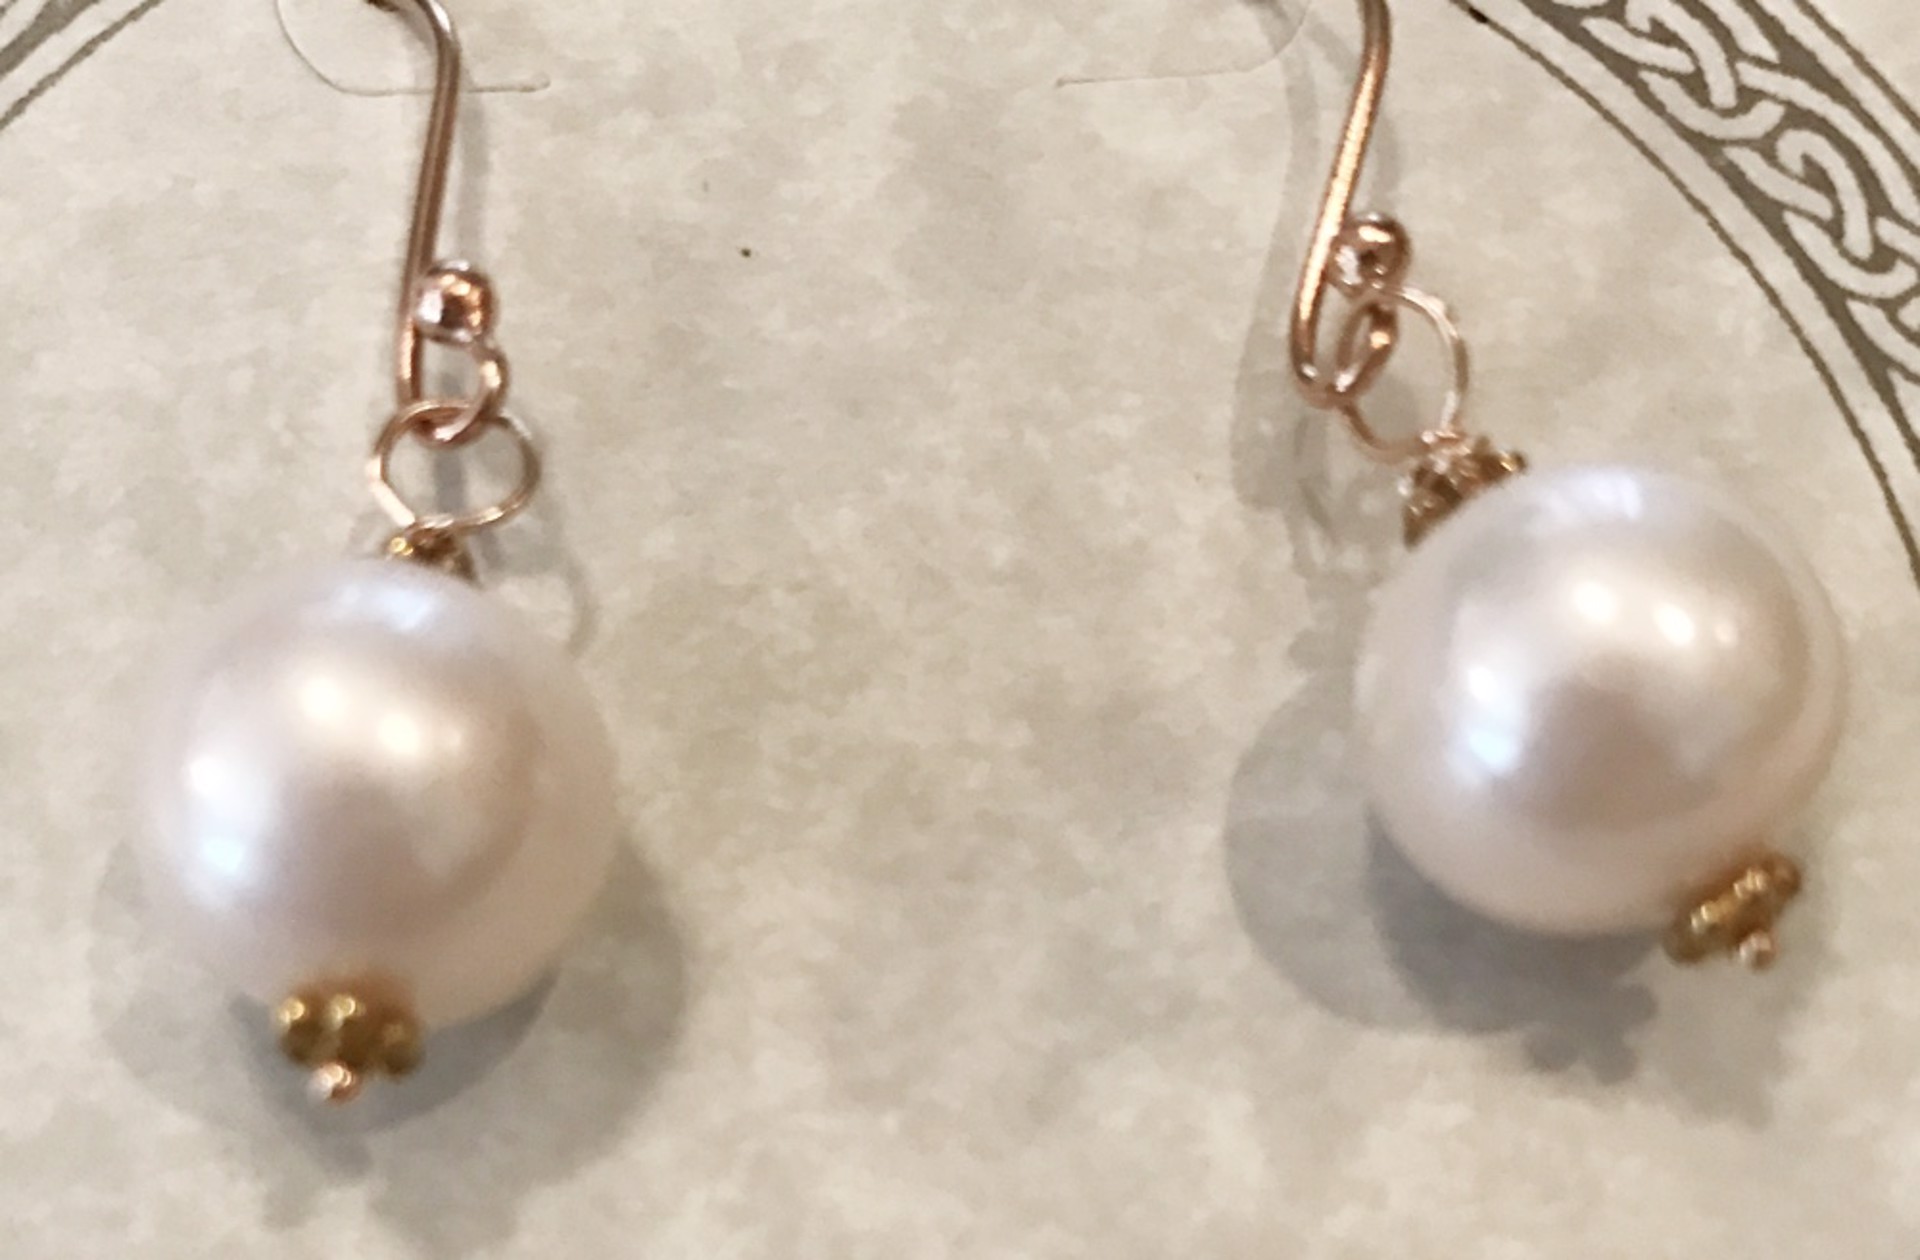 Earrings - Freshwater Pearl & Rose Gold  #7774 by Bonnie Jaus